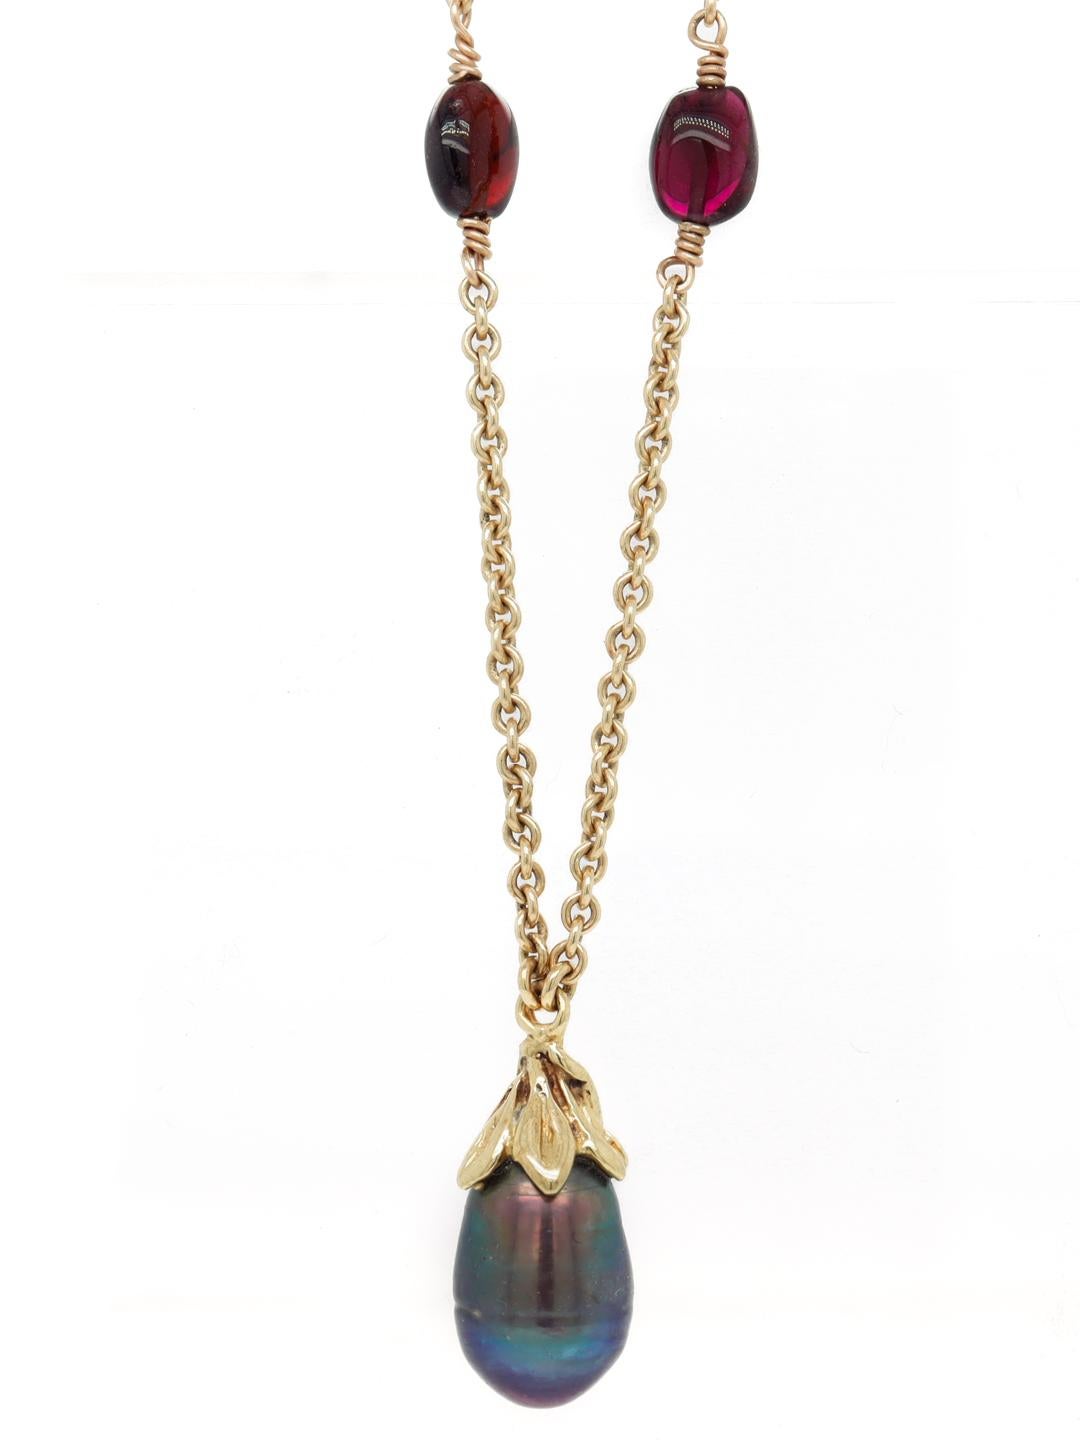 Lazaro Diaz Layered Double Chain 18k Gold, Amethyst, & Tahitian Pearl Necklace For Sale 6